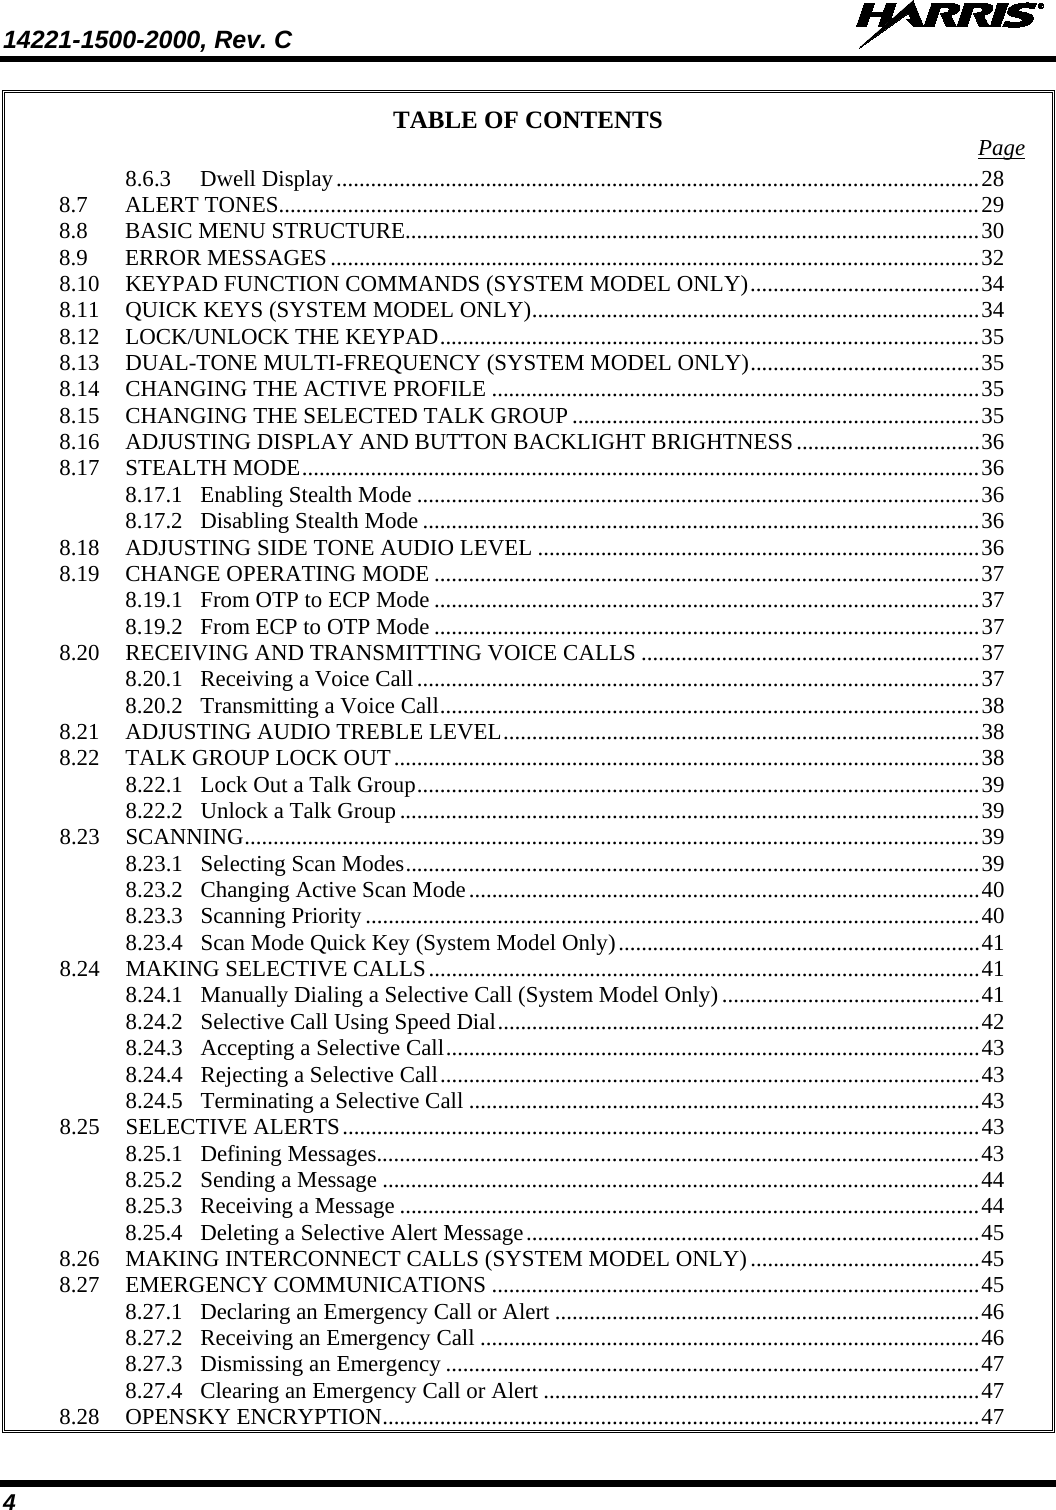 14221-1500-2000, Rev. C   4 TABLE OF CONTENTS Page 8.6.3 Dwell Display ................................................................................................................ 28 8.7 ALERT TONES .......................................................................................................................... 29 8.8 BASIC MENU STRUCTURE.................................................................................................... 30 8.9 ERROR MESSAGES ................................................................................................................. 32 8.10 KEYPAD FUNCTION COMMANDS (SYSTEM MODEL ONLY) ........................................ 34 8.11 QUICK KEYS (SYSTEM MODEL ONLY) .............................................................................. 34 8.12 LOCK/UNLOCK THE KEYPAD .............................................................................................. 35 8.13 DUAL-TONE MULTI-FREQUENCY (SYSTEM MODEL ONLY) ........................................ 35 8.14 CHANGING THE ACTIVE PROFILE ..................................................................................... 35 8.15 CHANGING THE SELECTED TALK GROUP ....................................................................... 35 8.16 ADJUSTING DISPLAY AND BUTTON BACKLIGHT BRIGHTNESS ................................ 36 8.17 STEALTH MODE ...................................................................................................................... 36 8.17.1 Enabling Stealth Mode .................................................................................................. 36 8.17.2 Disabling Stealth Mode ................................................................................................. 36 8.18 ADJUSTING SIDE TONE AUDIO LEVEL ............................................................................. 36 8.19 CHANGE OPERATING MODE ............................................................................................... 37 8.19.1 From OTP to ECP Mode ............................................................................................... 37 8.19.2 From ECP to OTP Mode ............................................................................................... 37 8.20 RECEIVING AND TRANSMITTING VOICE CALLS ........................................................... 37 8.20.1 Receiving a Voice Call .................................................................................................. 37 8.20.2 Transmitting a Voice Call .............................................................................................. 38 8.21 ADJUSTING AUDIO TREBLE LEVEL ................................................................................... 38 8.22 TALK GROUP LOCK OUT ...................................................................................................... 38 8.22.1 Lock Out a Talk Group .................................................................................................. 39 8.22.2 Unlock a Talk Group ..................................................................................................... 39 8.23 SCANNING ................................................................................................................................ 39 8.23.1 Selecting Scan Modes .................................................................................................... 39 8.23.2 Changing Active Scan Mode ......................................................................................... 40 8.23.3 Scanning Priority ........................................................................................................... 40 8.23.4 Scan Mode Quick Key (System Model Only) ............................................................... 41 8.24 MAKING SELECTIVE CALLS ................................................................................................ 41 8.24.1 Manually Dialing a Selective Call (System Model Only) ............................................. 41 8.24.2 Selective Call Using Speed Dial .................................................................................... 42 8.24.3 Accepting a Selective Call ............................................................................................. 43 8.24.4 Rejecting a Selective Call .............................................................................................. 43 8.24.5 Terminating a Selective Call ......................................................................................... 43 8.25 SELECTIVE ALERTS ............................................................................................................... 43 8.25.1 Defining Messages......................................................................................................... 43 8.25.2 Sending a Message ........................................................................................................ 44 8.25.3 Receiving a Message ..................................................................................................... 44 8.25.4 Deleting a Selective Alert Message ............................................................................... 45 8.26 MAKING INTERCONNECT CALLS (SYSTEM MODEL ONLY) ........................................ 45 8.27 EMERGENCY COMMUNICATIONS ..................................................................................... 45 8.27.1 Declaring an Emergency Call or Alert .......................................................................... 46 8.27.2 Receiving an Emergency Call ....................................................................................... 46 8.27.3 Dismissing an Emergency ............................................................................................. 47 8.27.4 Clearing an Emergency Call or Alert ............................................................................ 47 8.28 OPENSKY ENCRYPTION ........................................................................................................ 47 